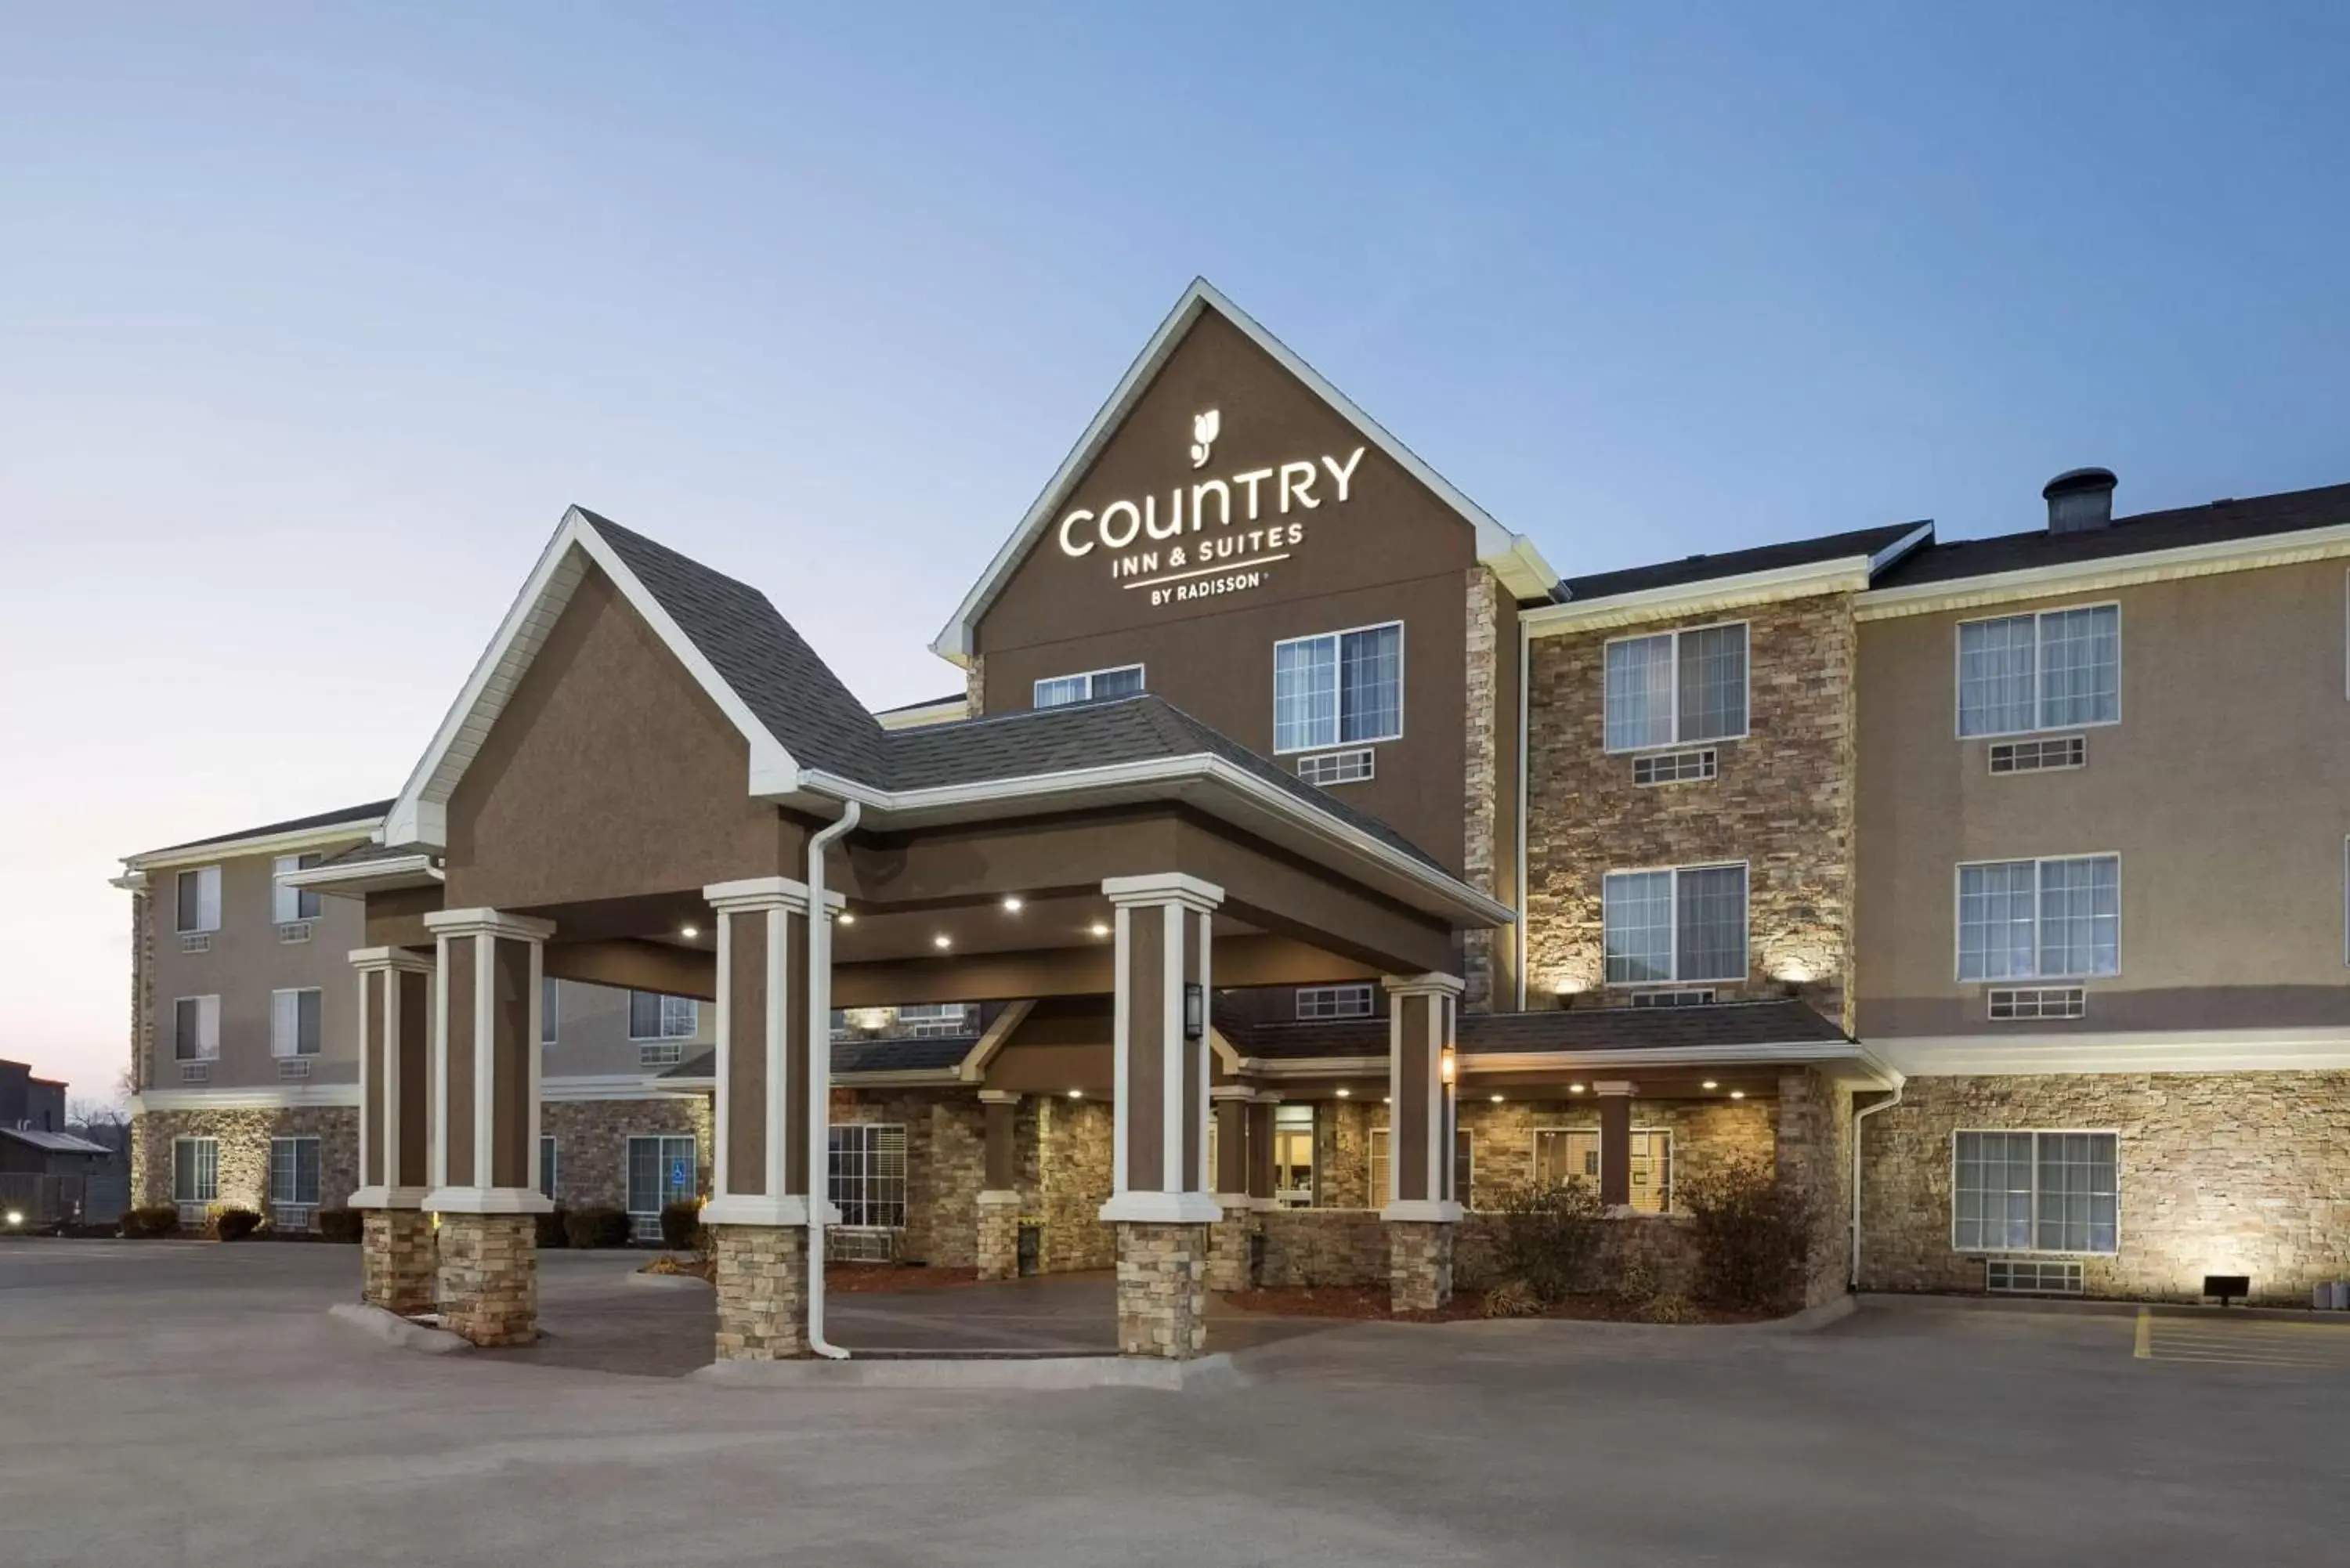 Property building in Country Inn & Suites by Radisson, Topeka West, KS